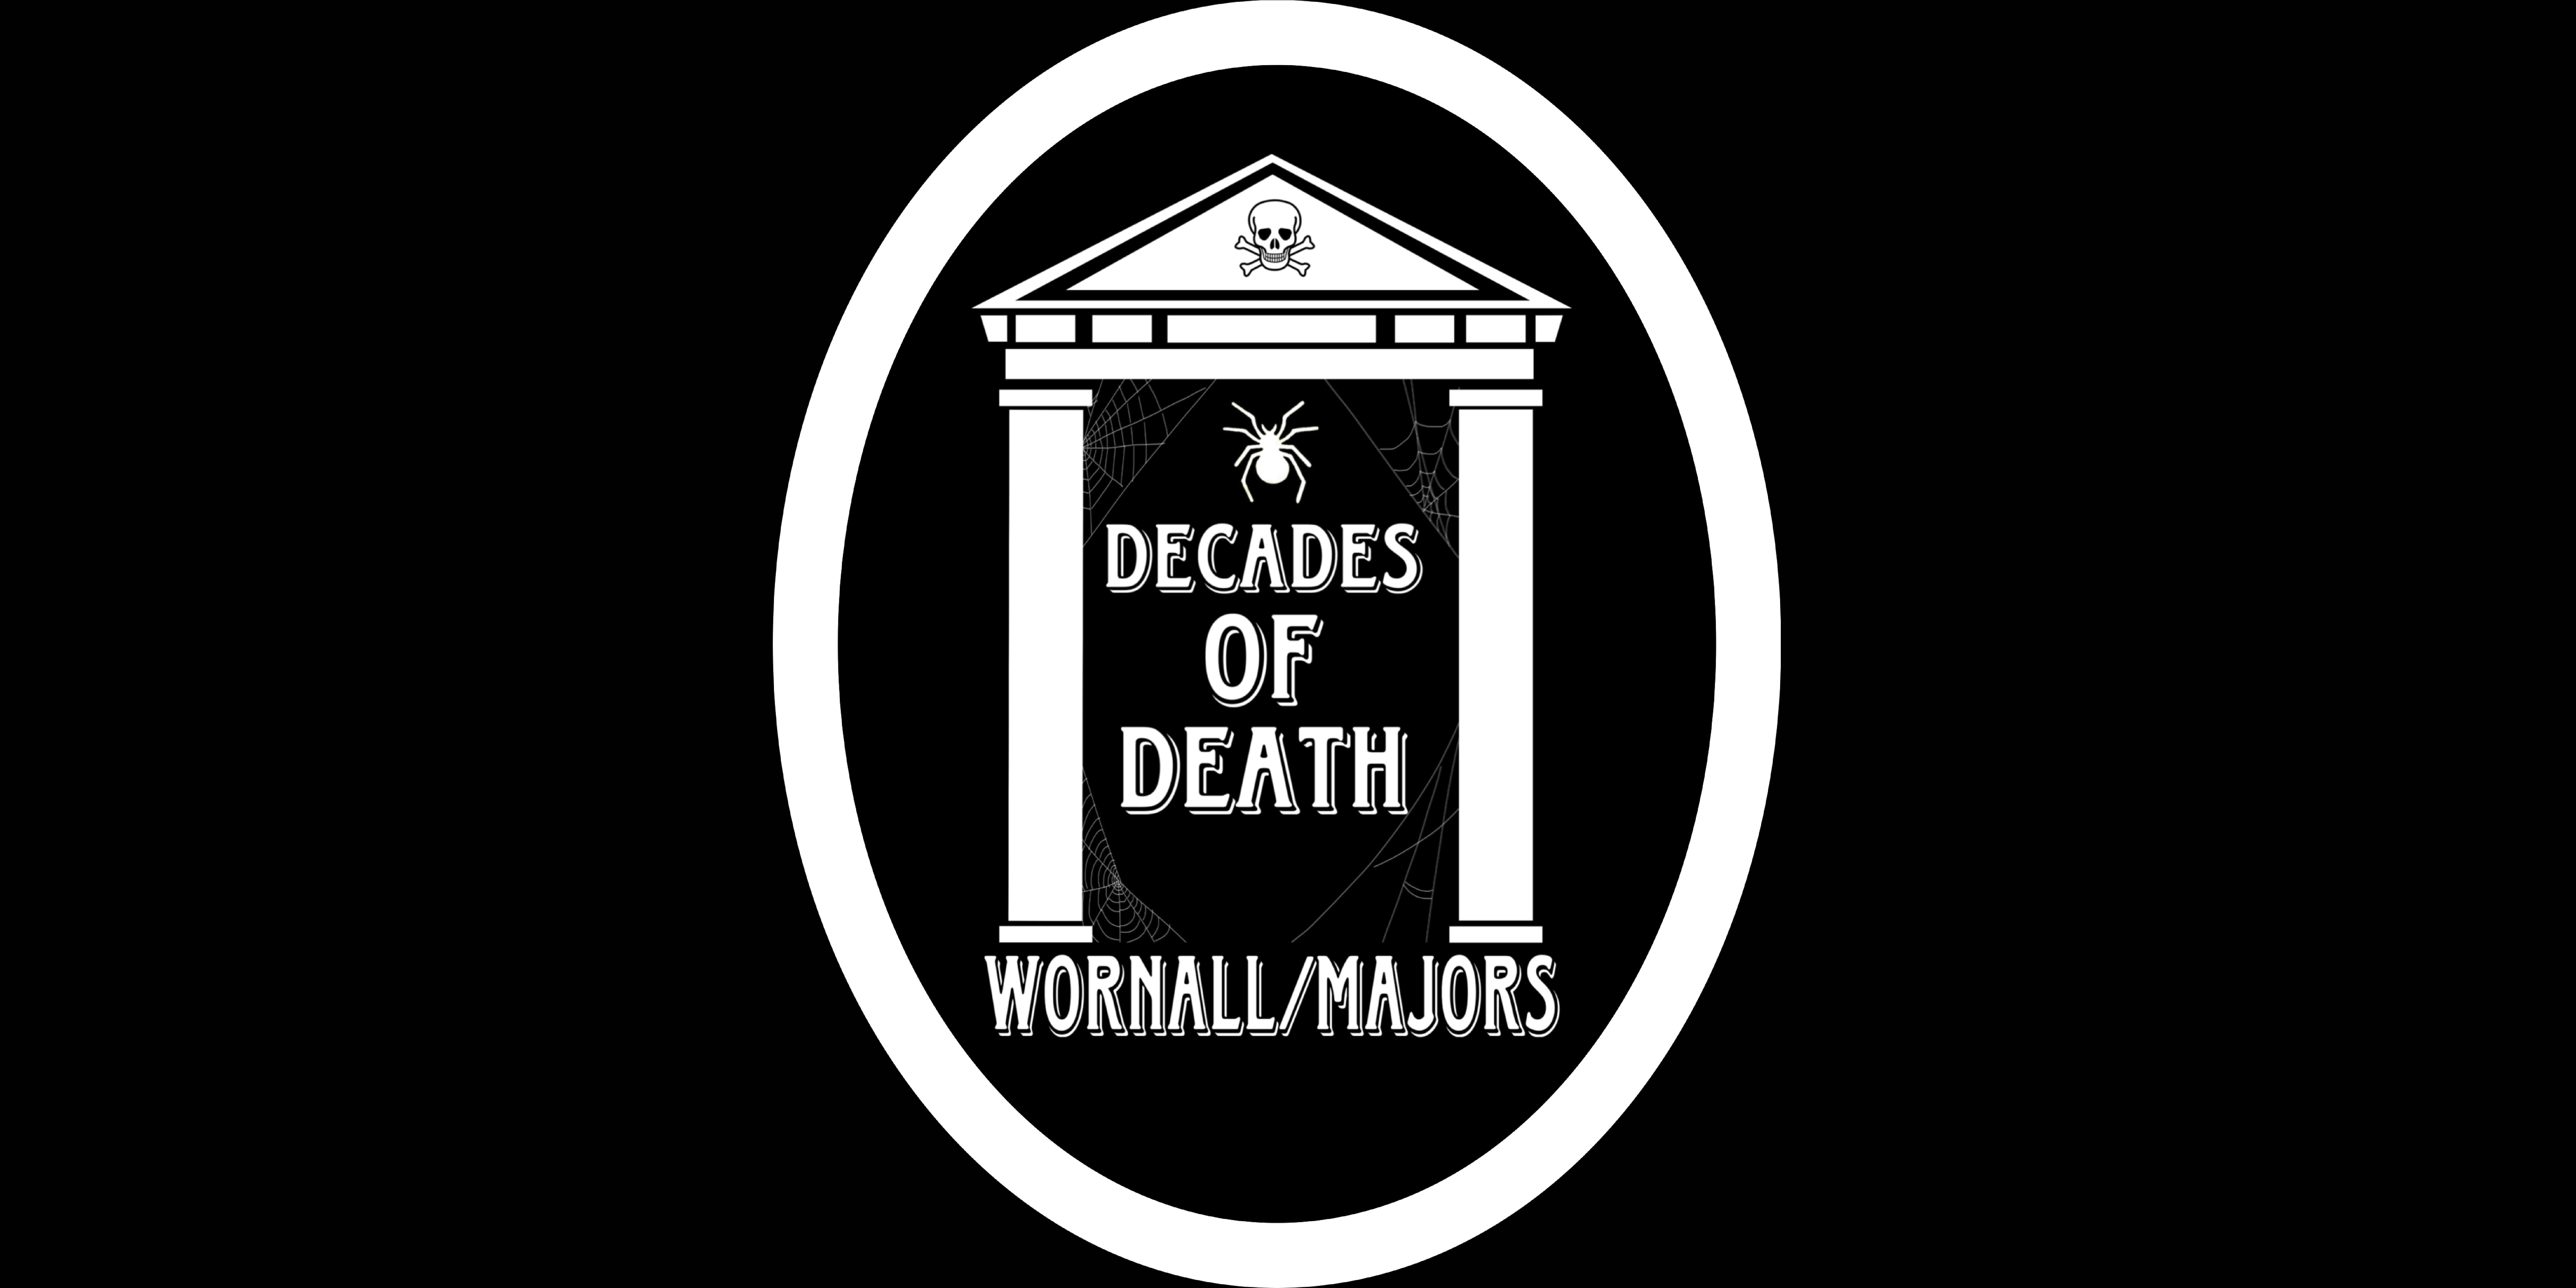 Thumbnail for the post titled: Decades of Death